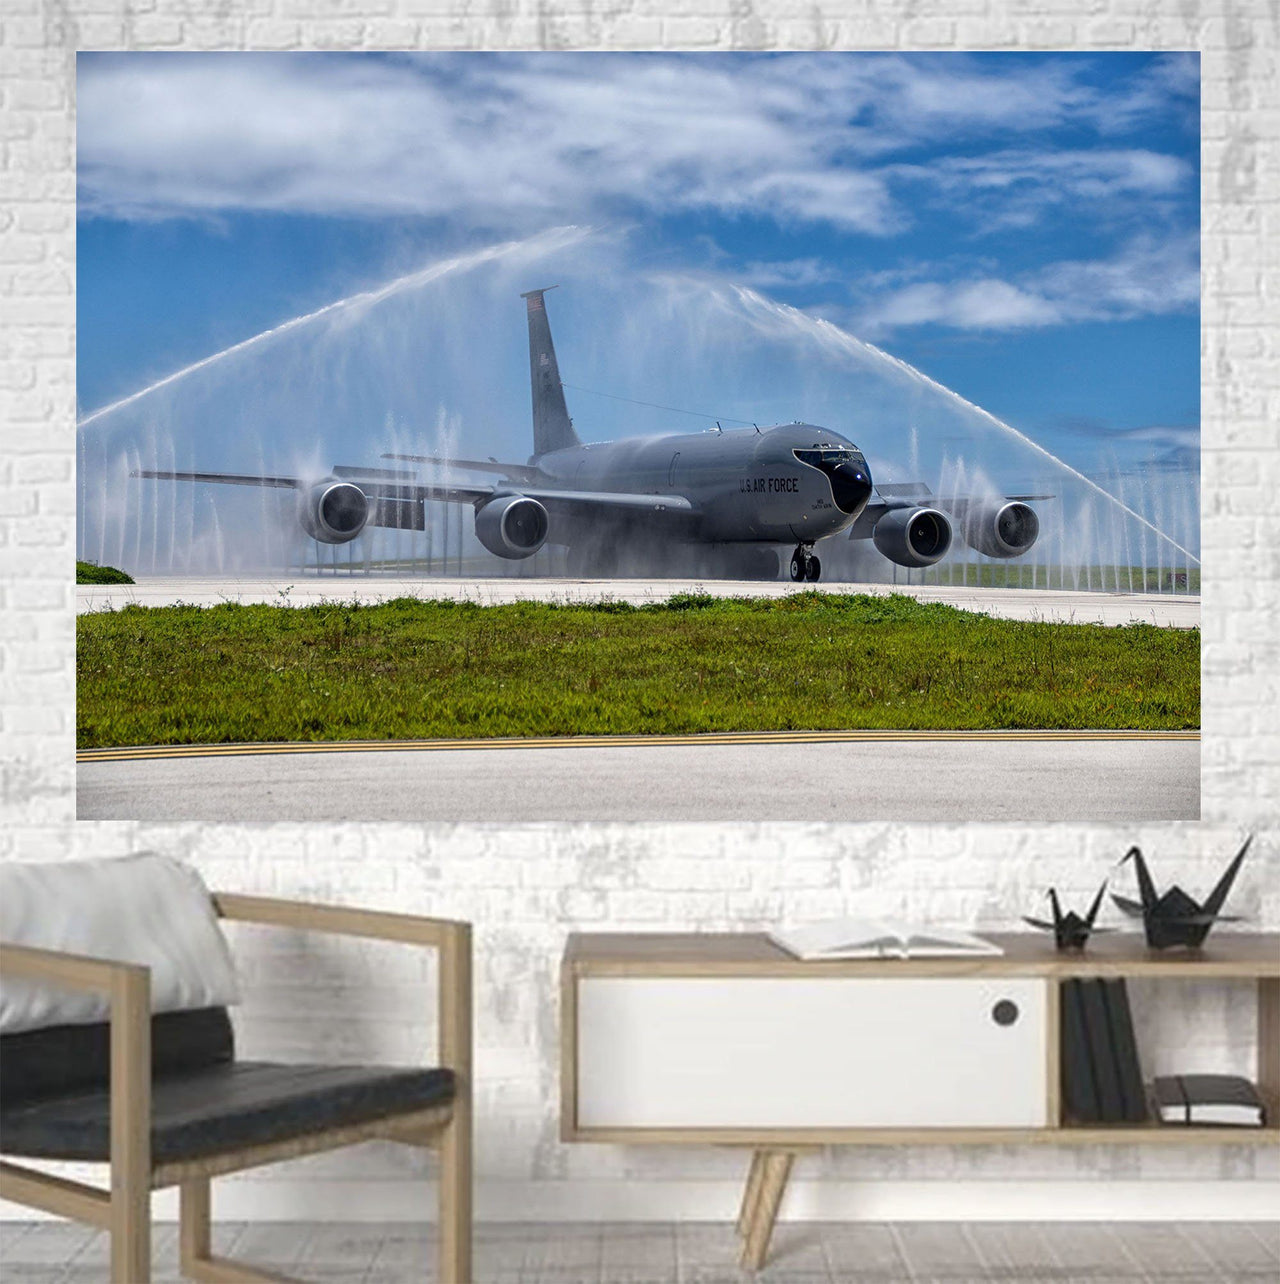 US Air Force Big Jet Printed Canvas Posters (1 Piece) Aviation Shop 